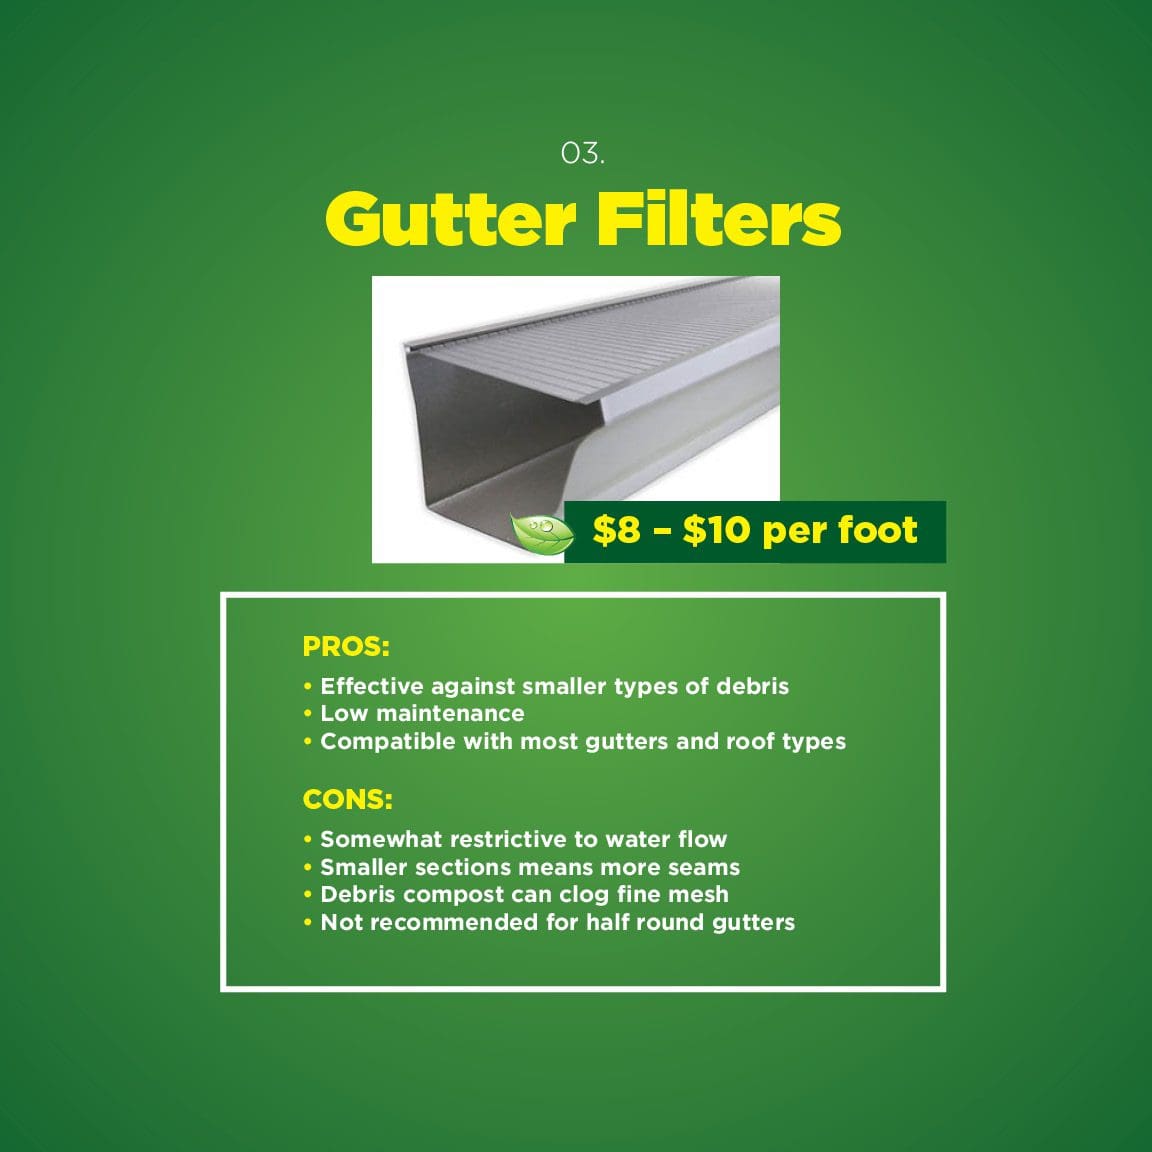 Gutter Filters pros and cons